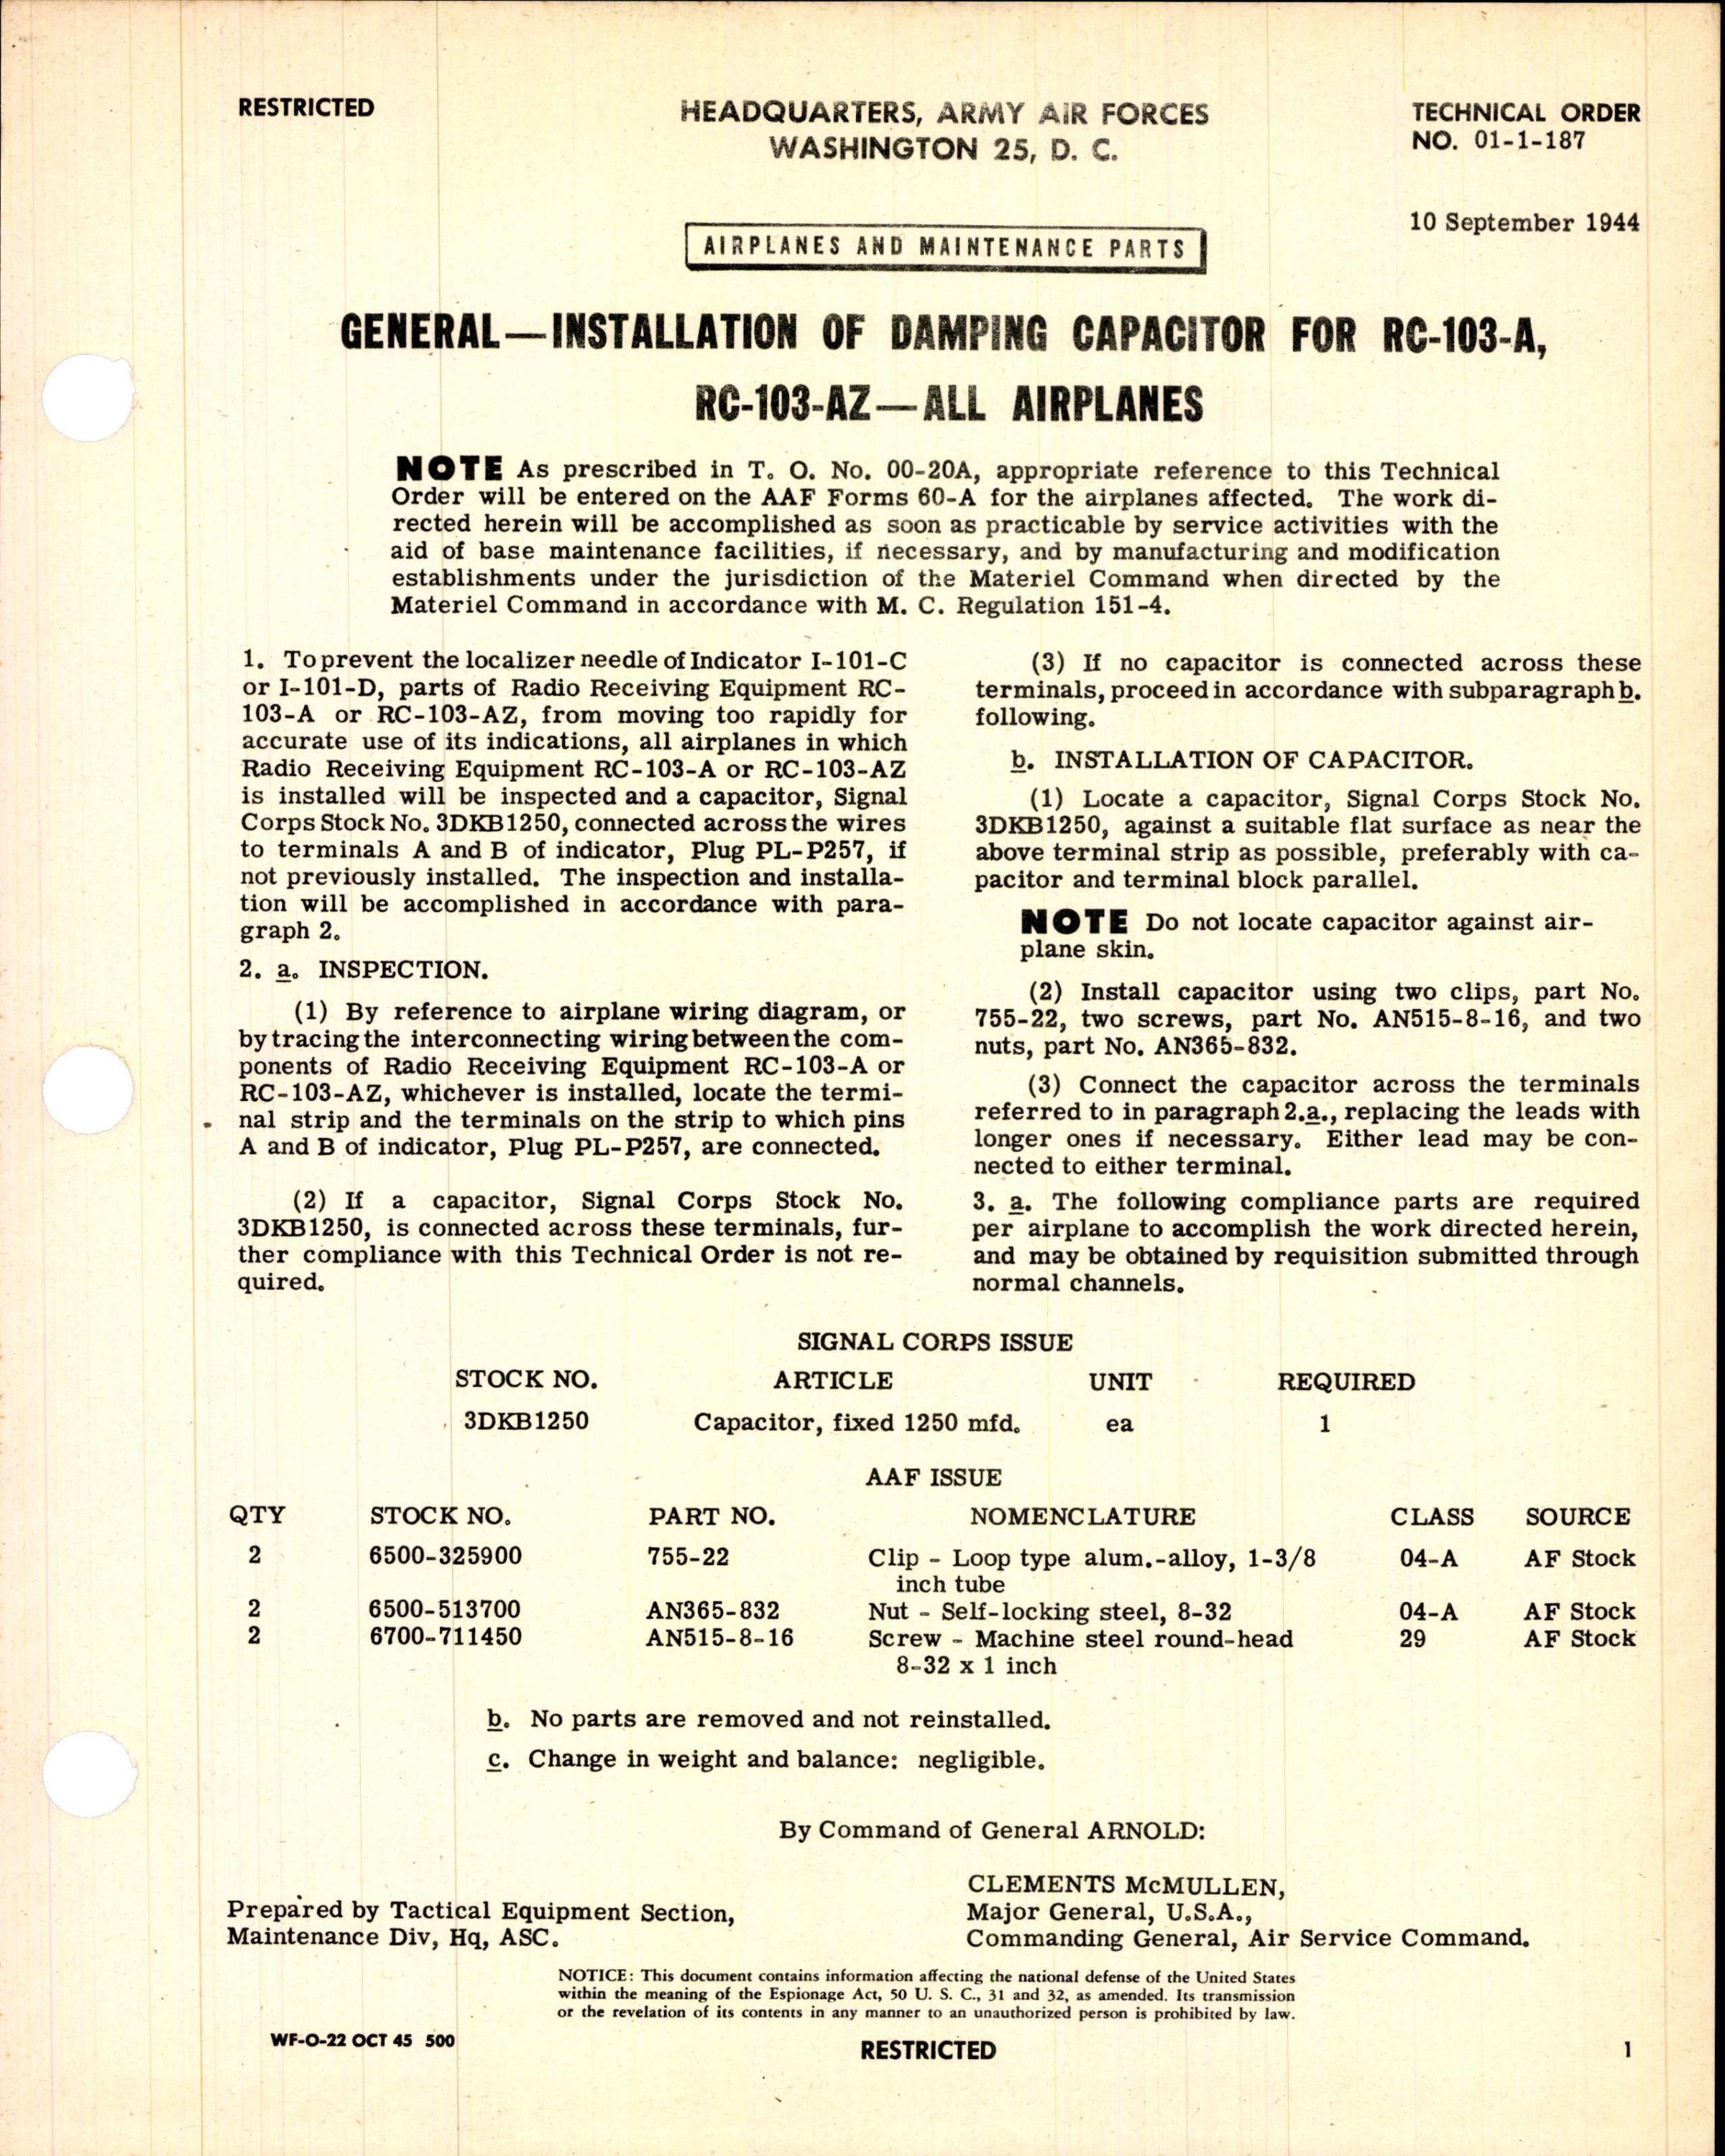 Sample page 1 from AirCorps Library document: Installation of Damping Capacitor for RC-103-A and RC-103-AZ